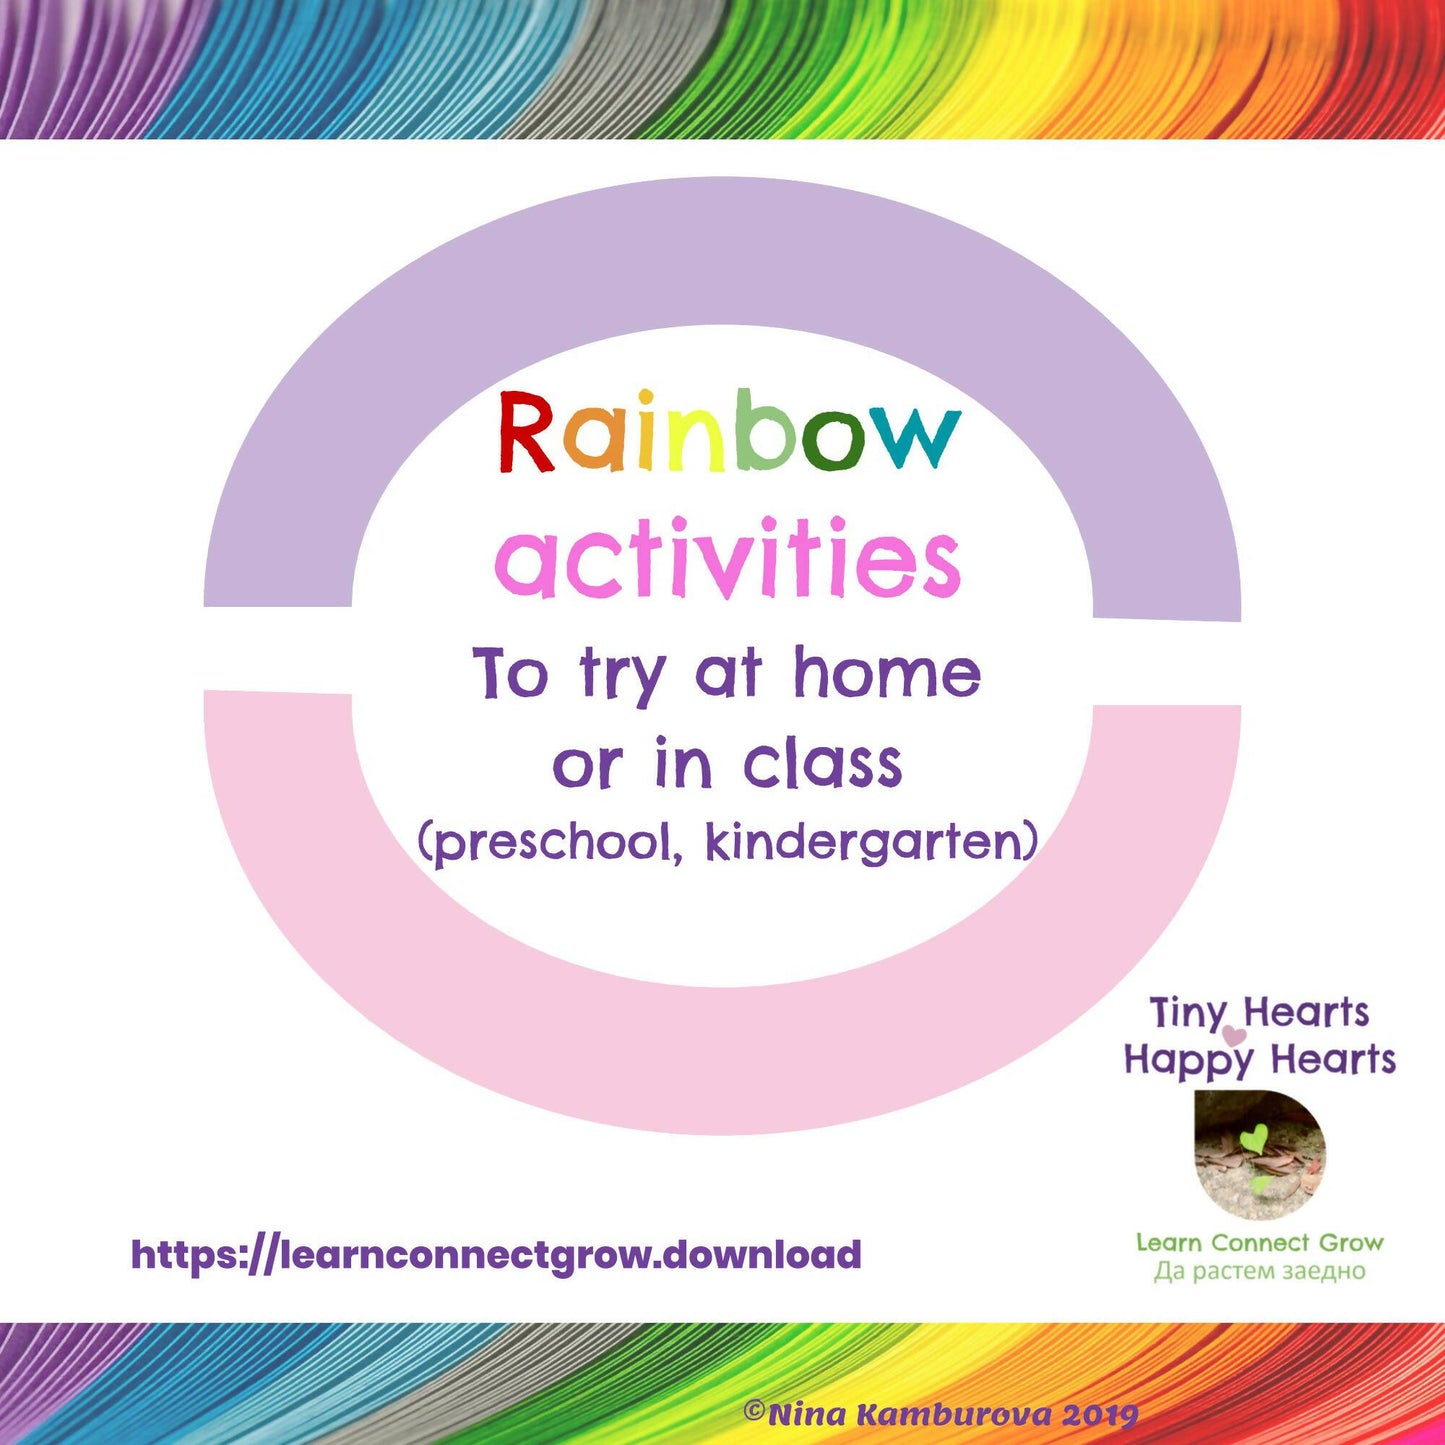 8 Simple rainbow activities to try at home or in class